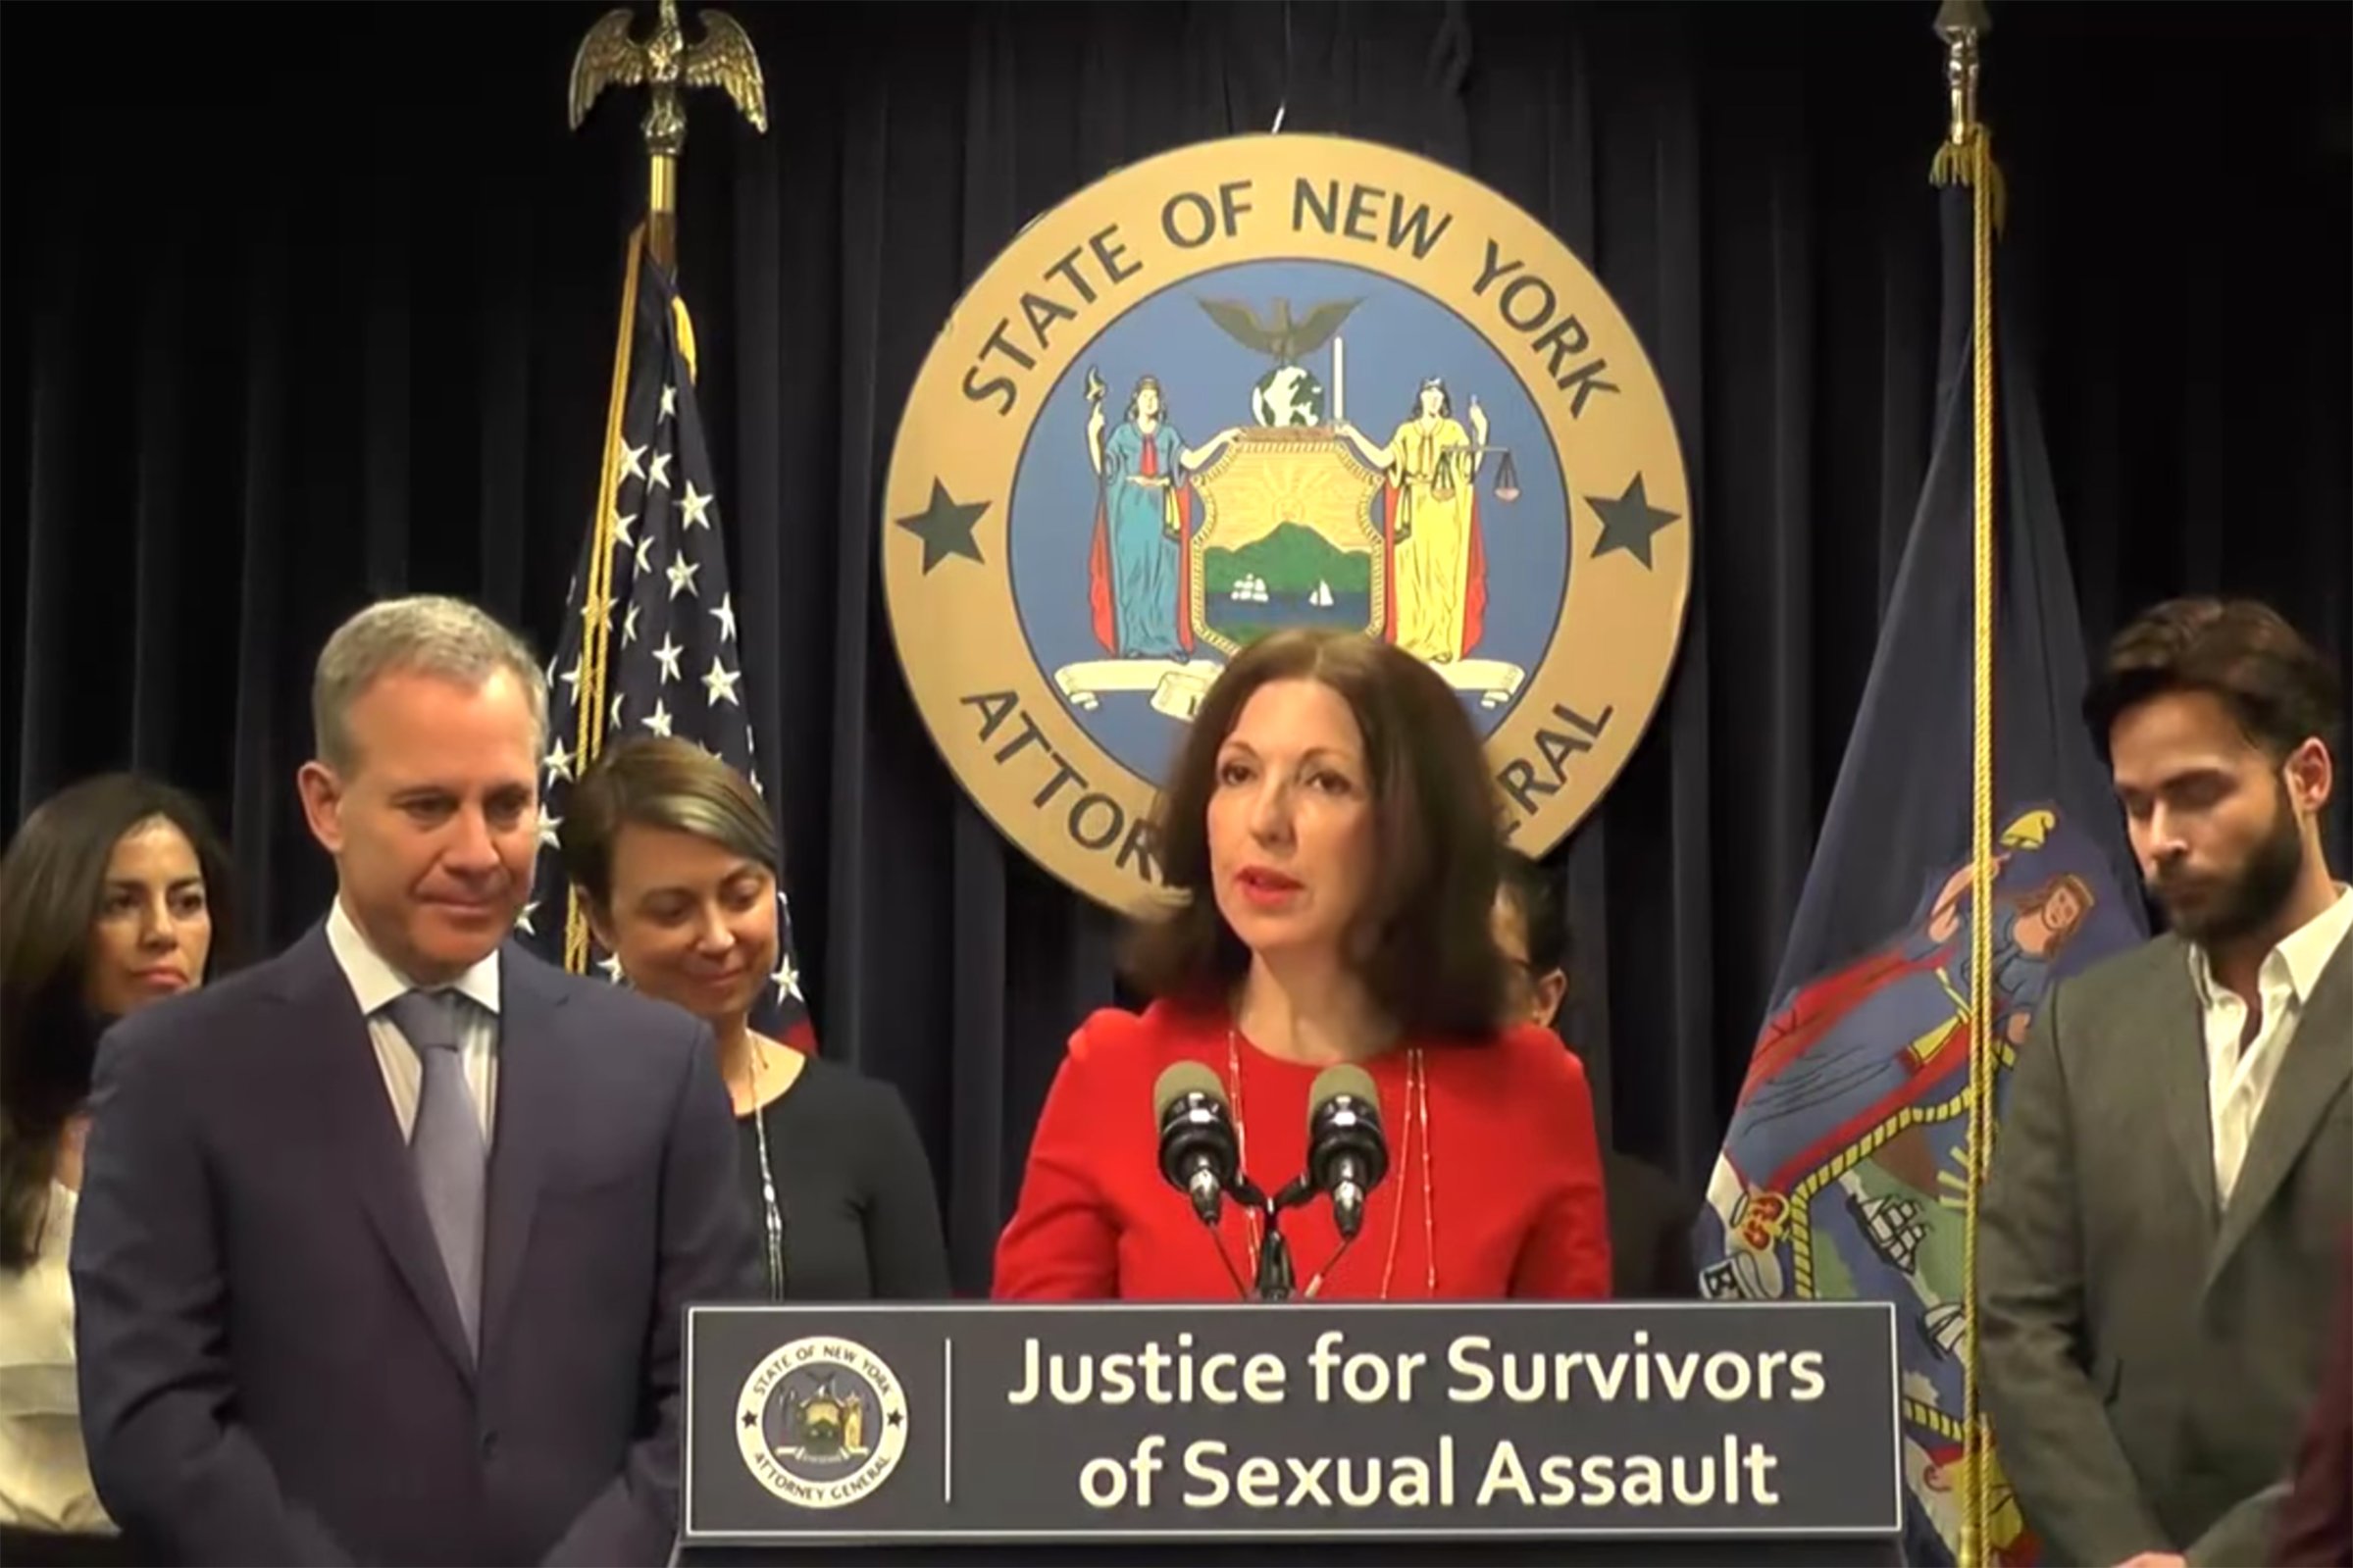 Judy Harris Kluger speaks at a press conference discussing protection of survivors of sexual assault in New York, on Nov 28, 2017.